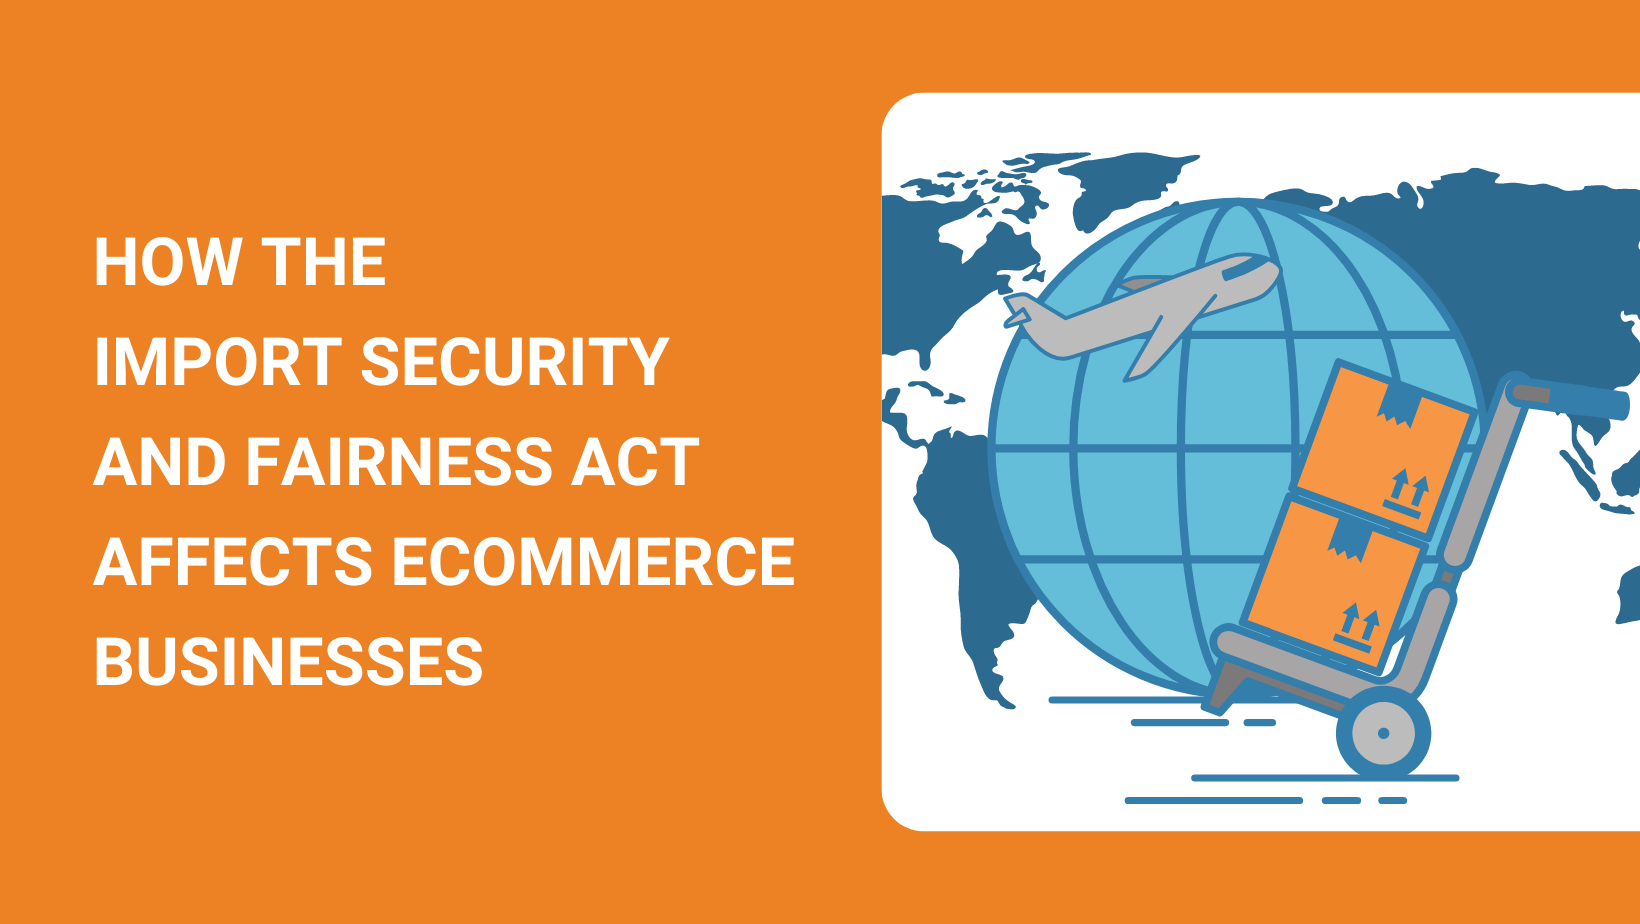 HOW THE IMPORT SECURITY AND FAIRNESS ACT AFFECTS ECOMMERCE BUSINESSES